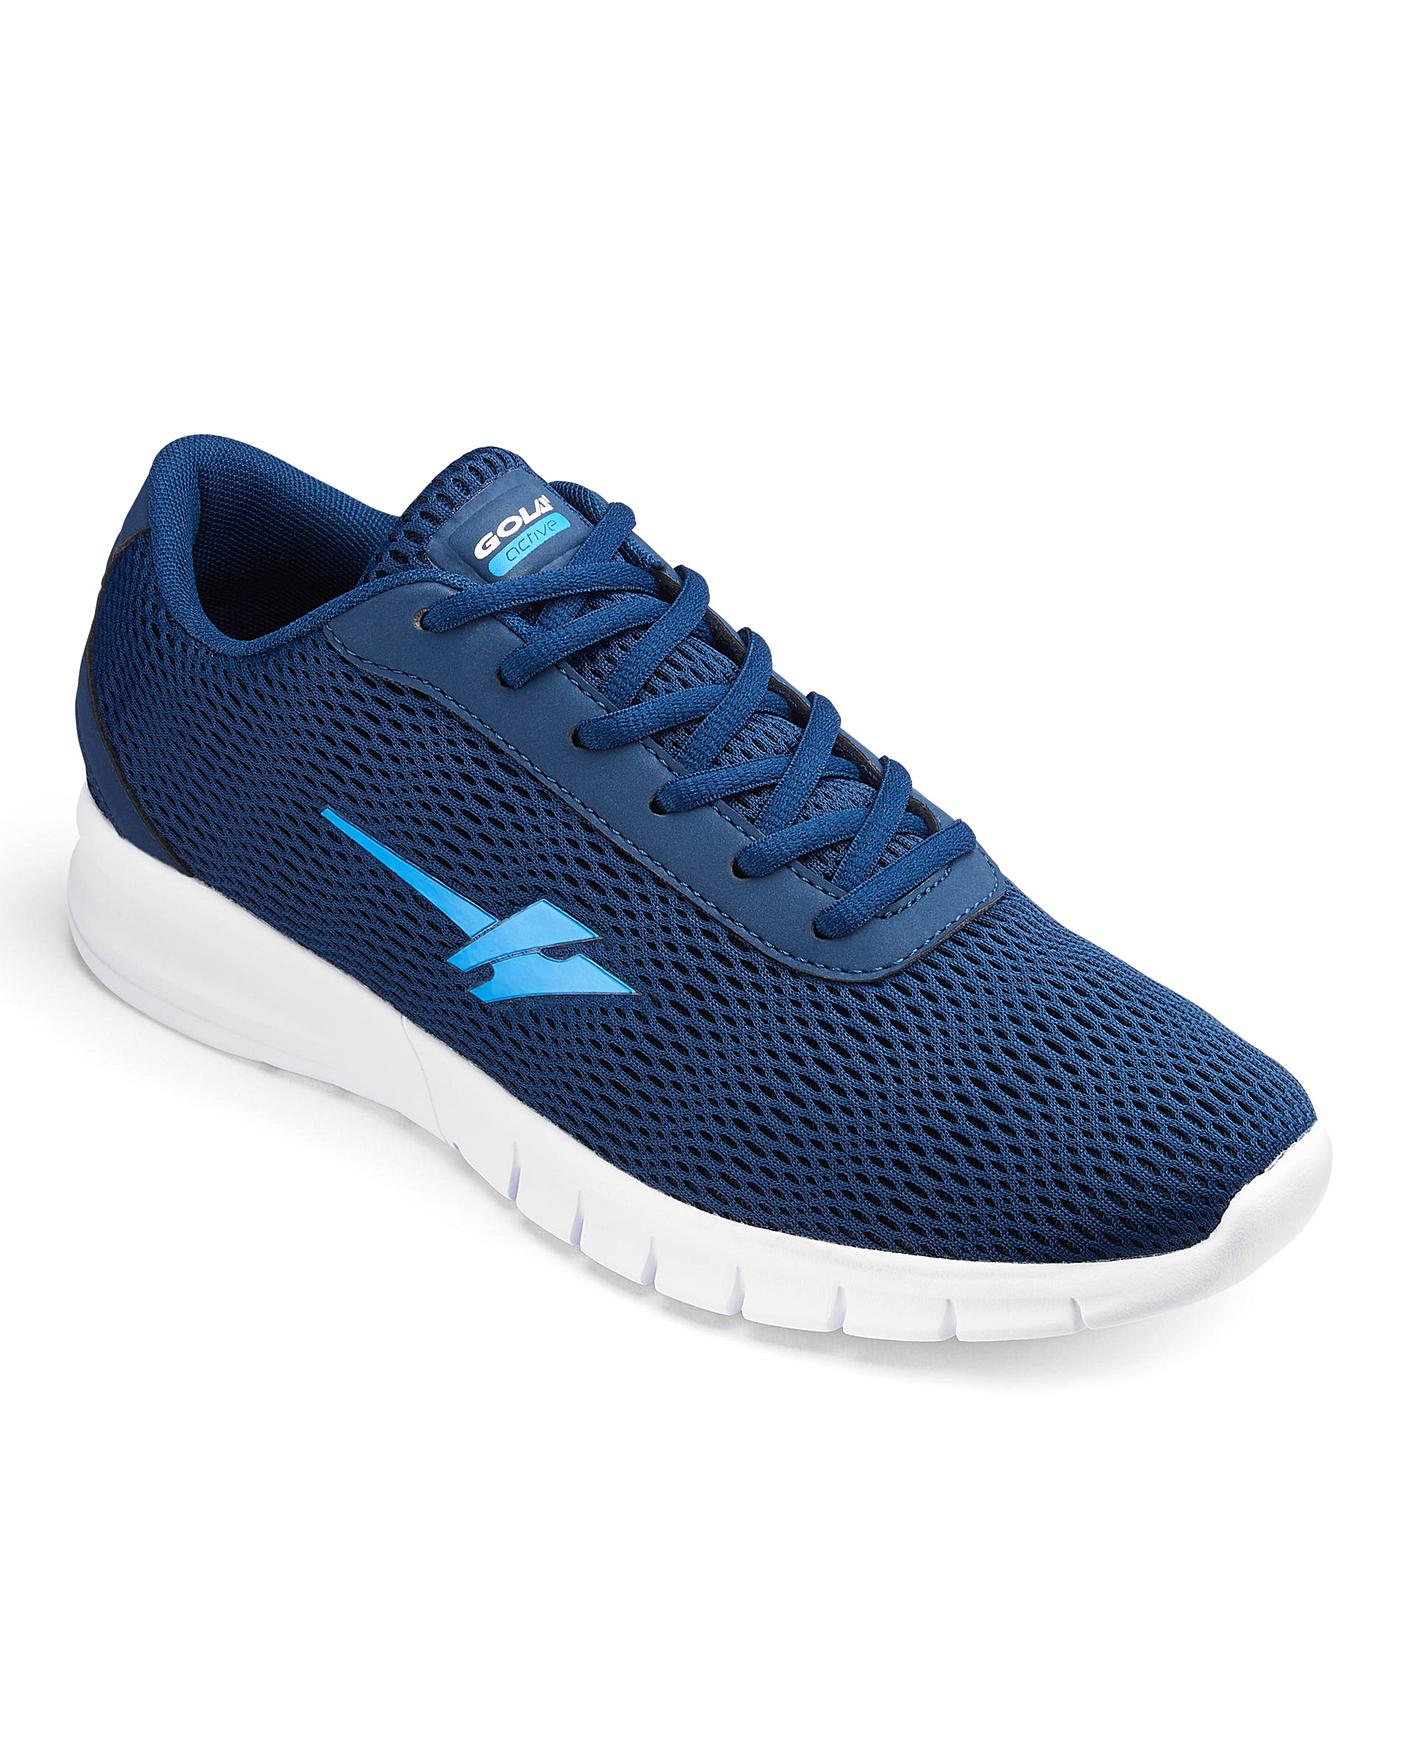 Gola Sports Beta 2 Wide Fit Trainers | Crazy Clearance